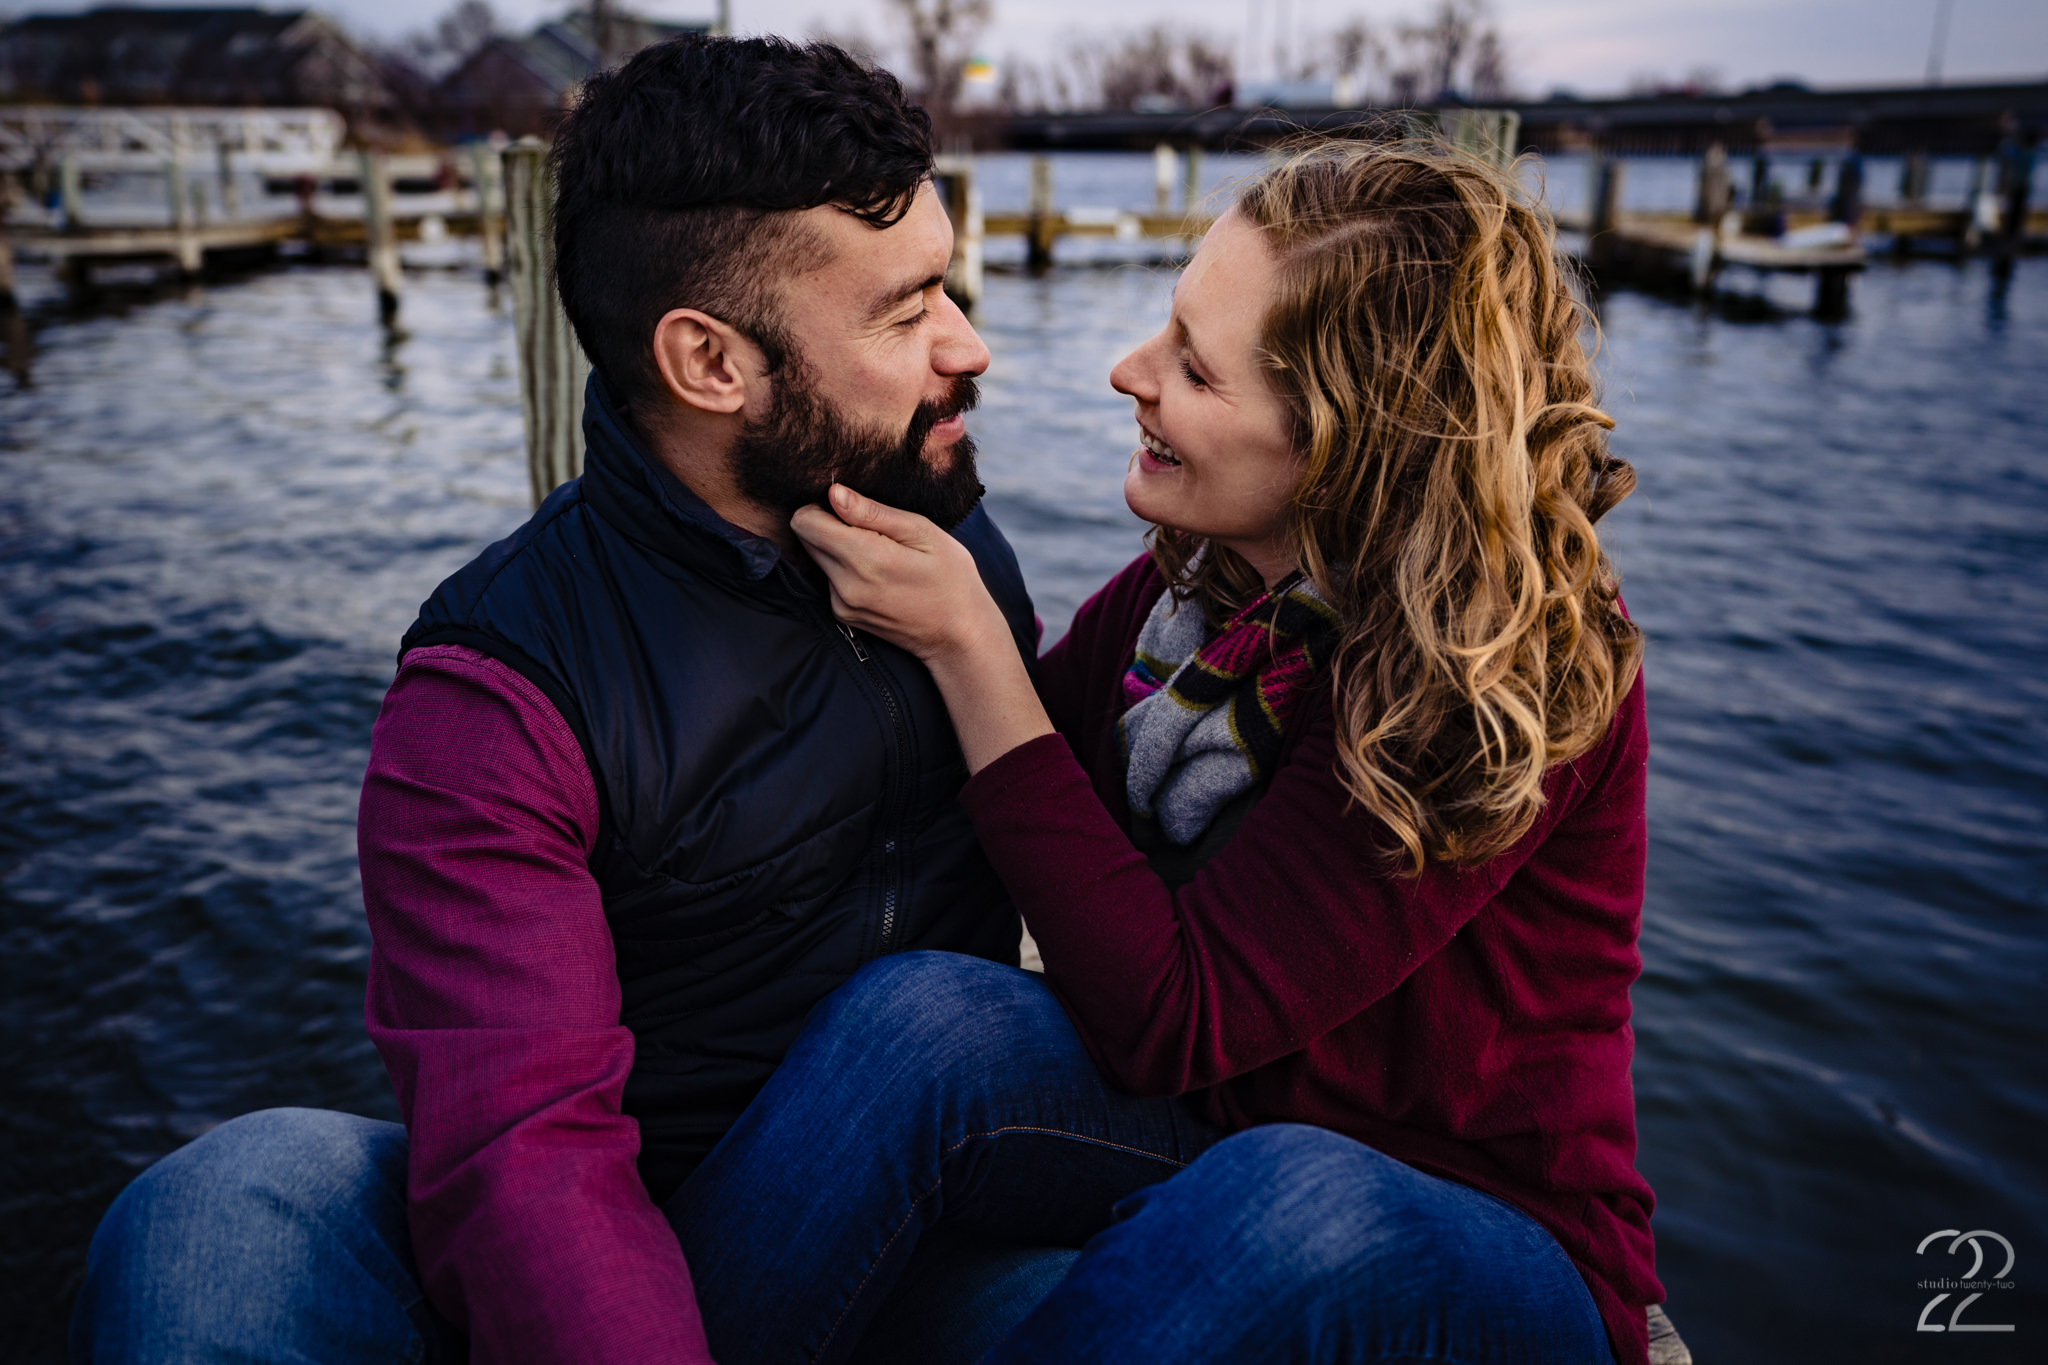  Fall photo sessions bring out the best looks. The rich and deep jewell tones, the layers and the accessories all combine into beautiful images. It also helps that the chilly temperatures force couples to snuggle in tighter than they may in the heat of the summer sun. 